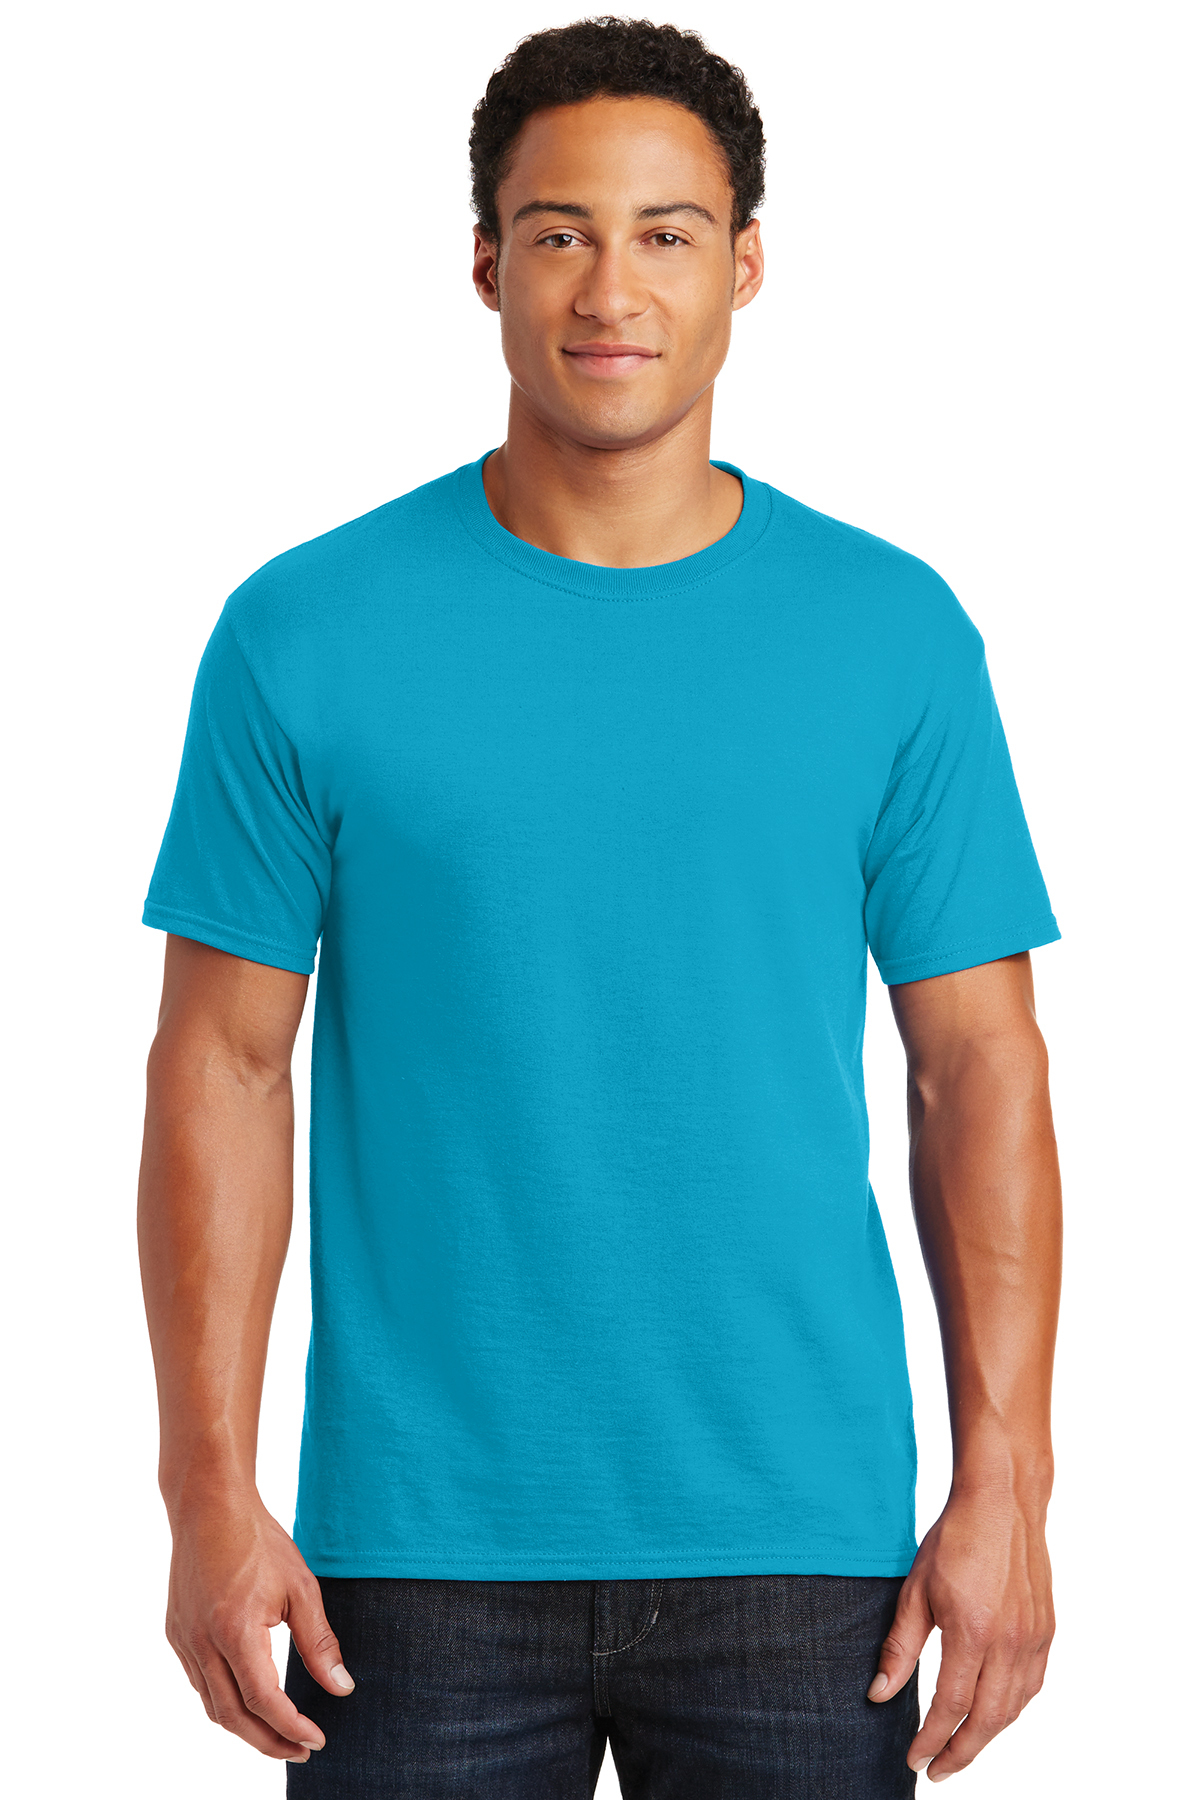 JERZEES - Dri-Power 50/50 Cotton/Poly T-Shirt | Product | Company Casuals